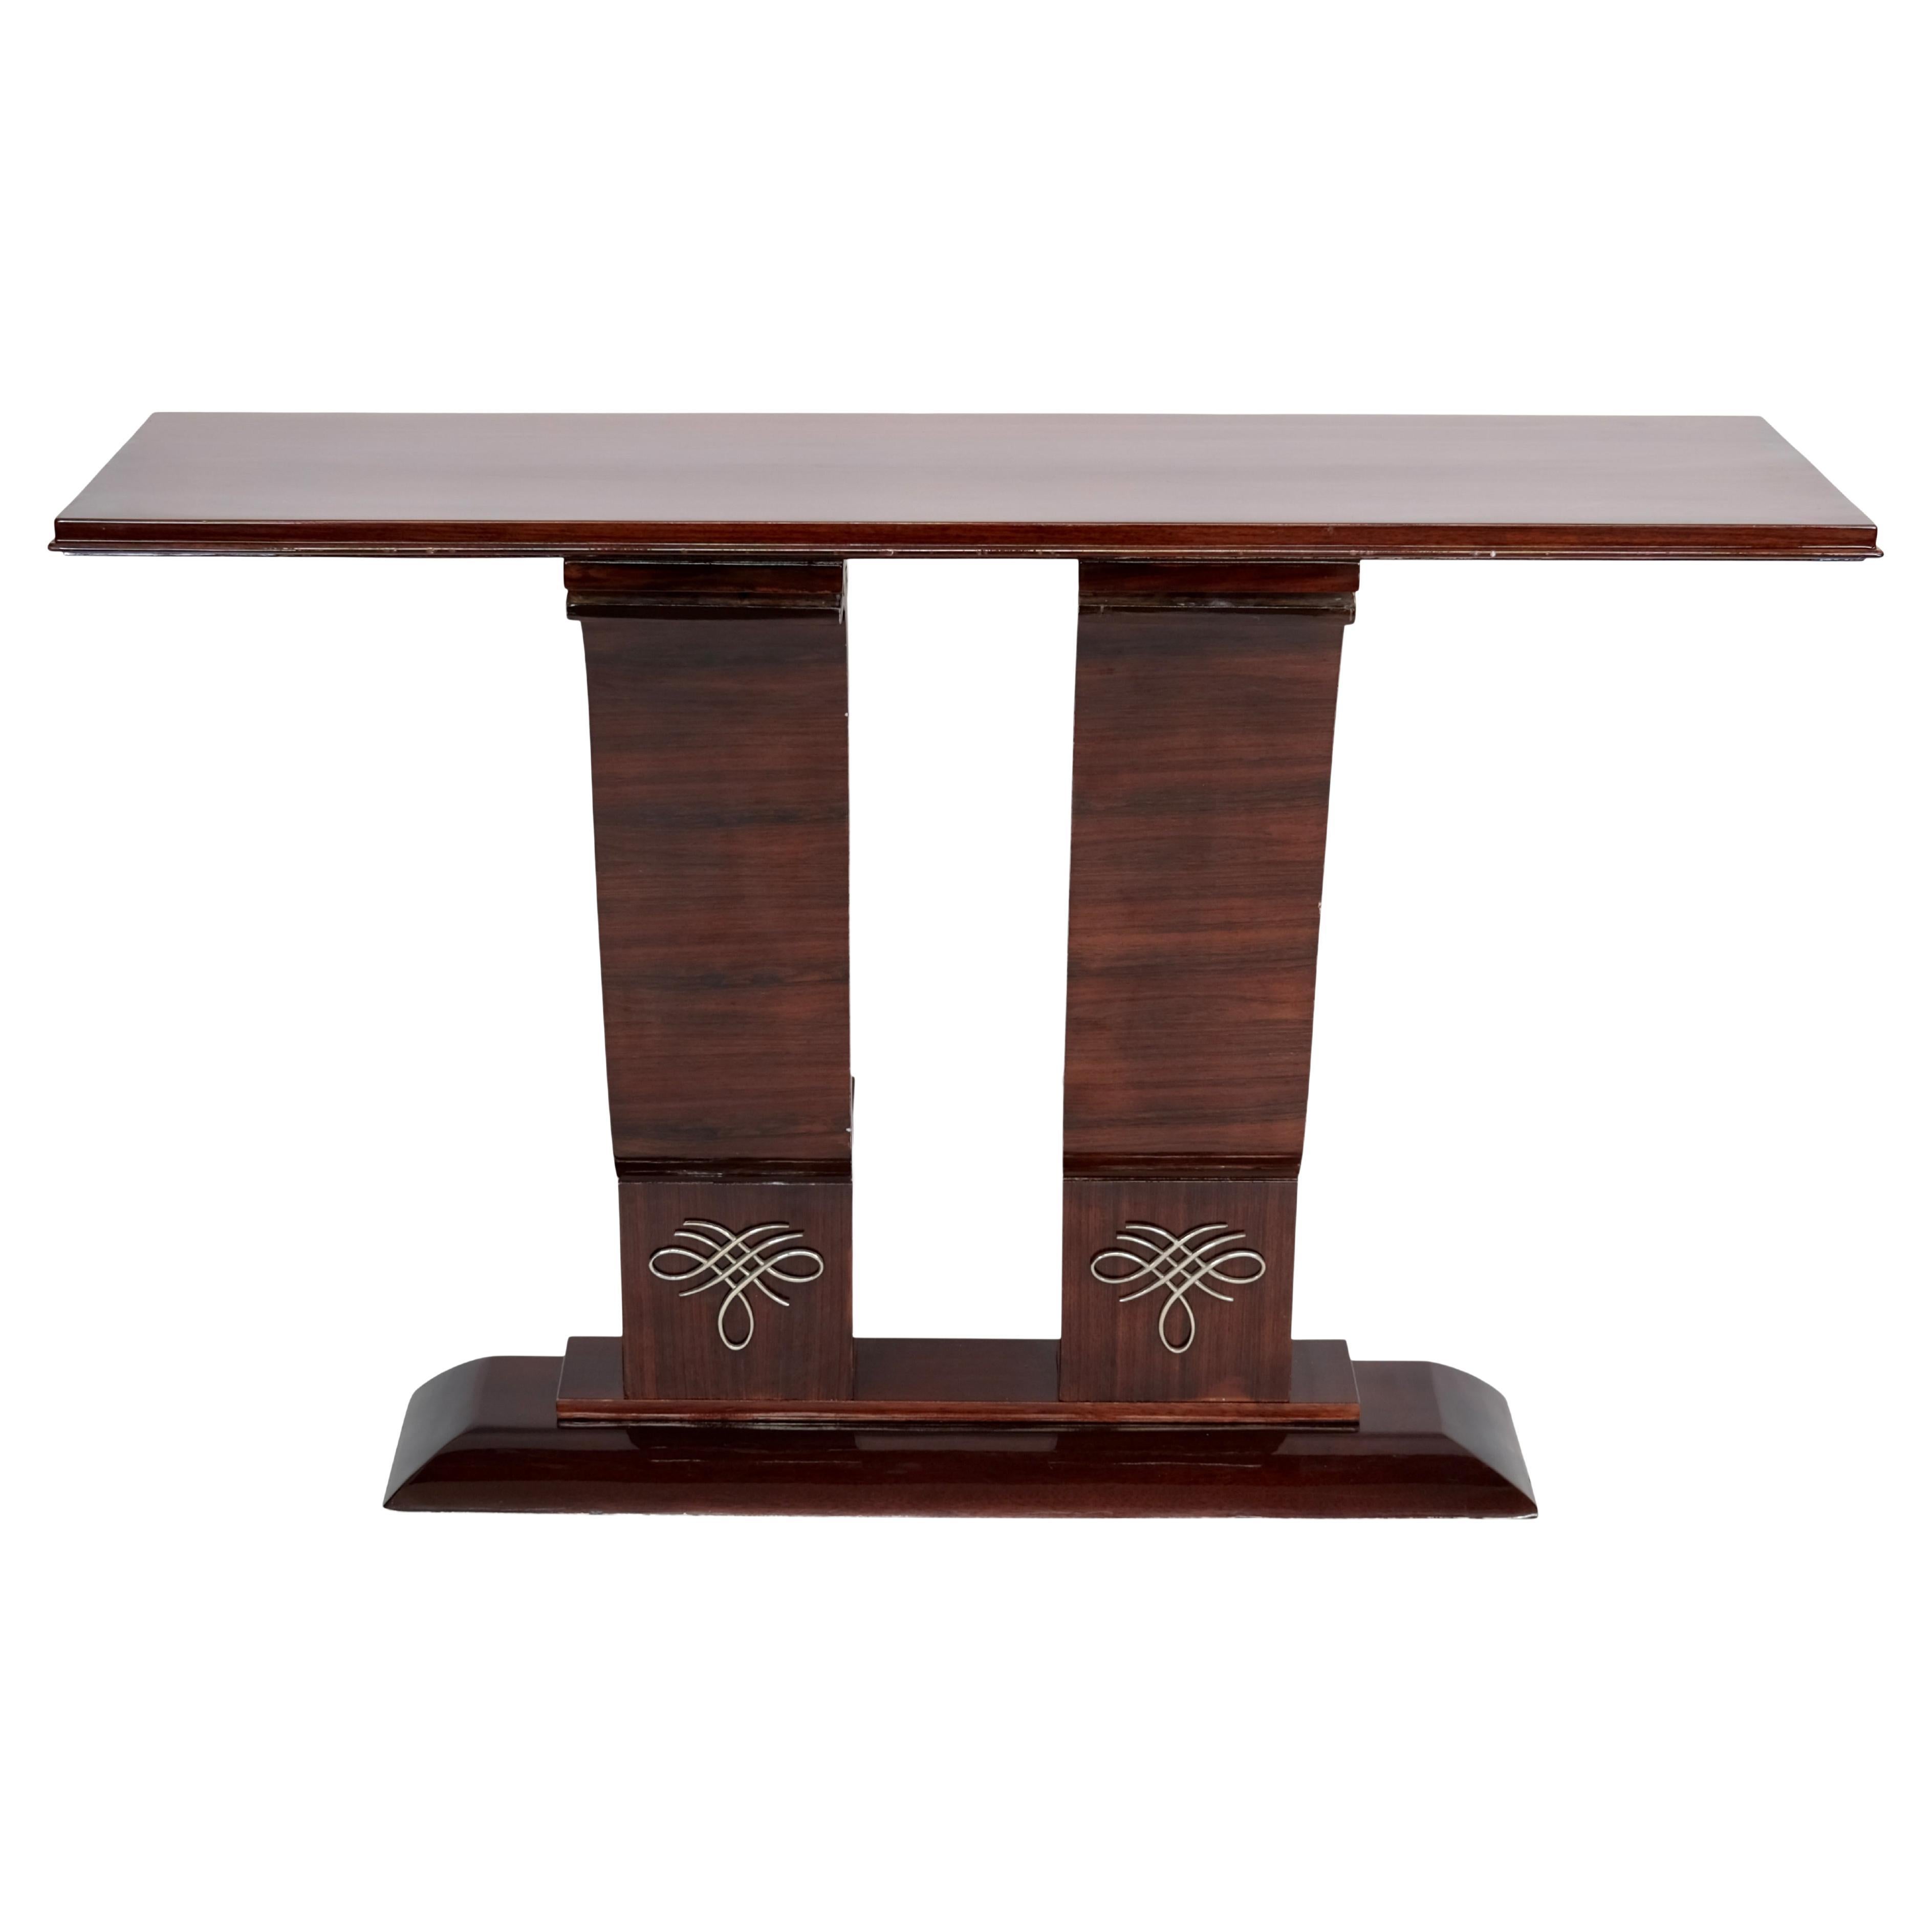 1930s French Art Deco Console Table in Mahogany For Sale